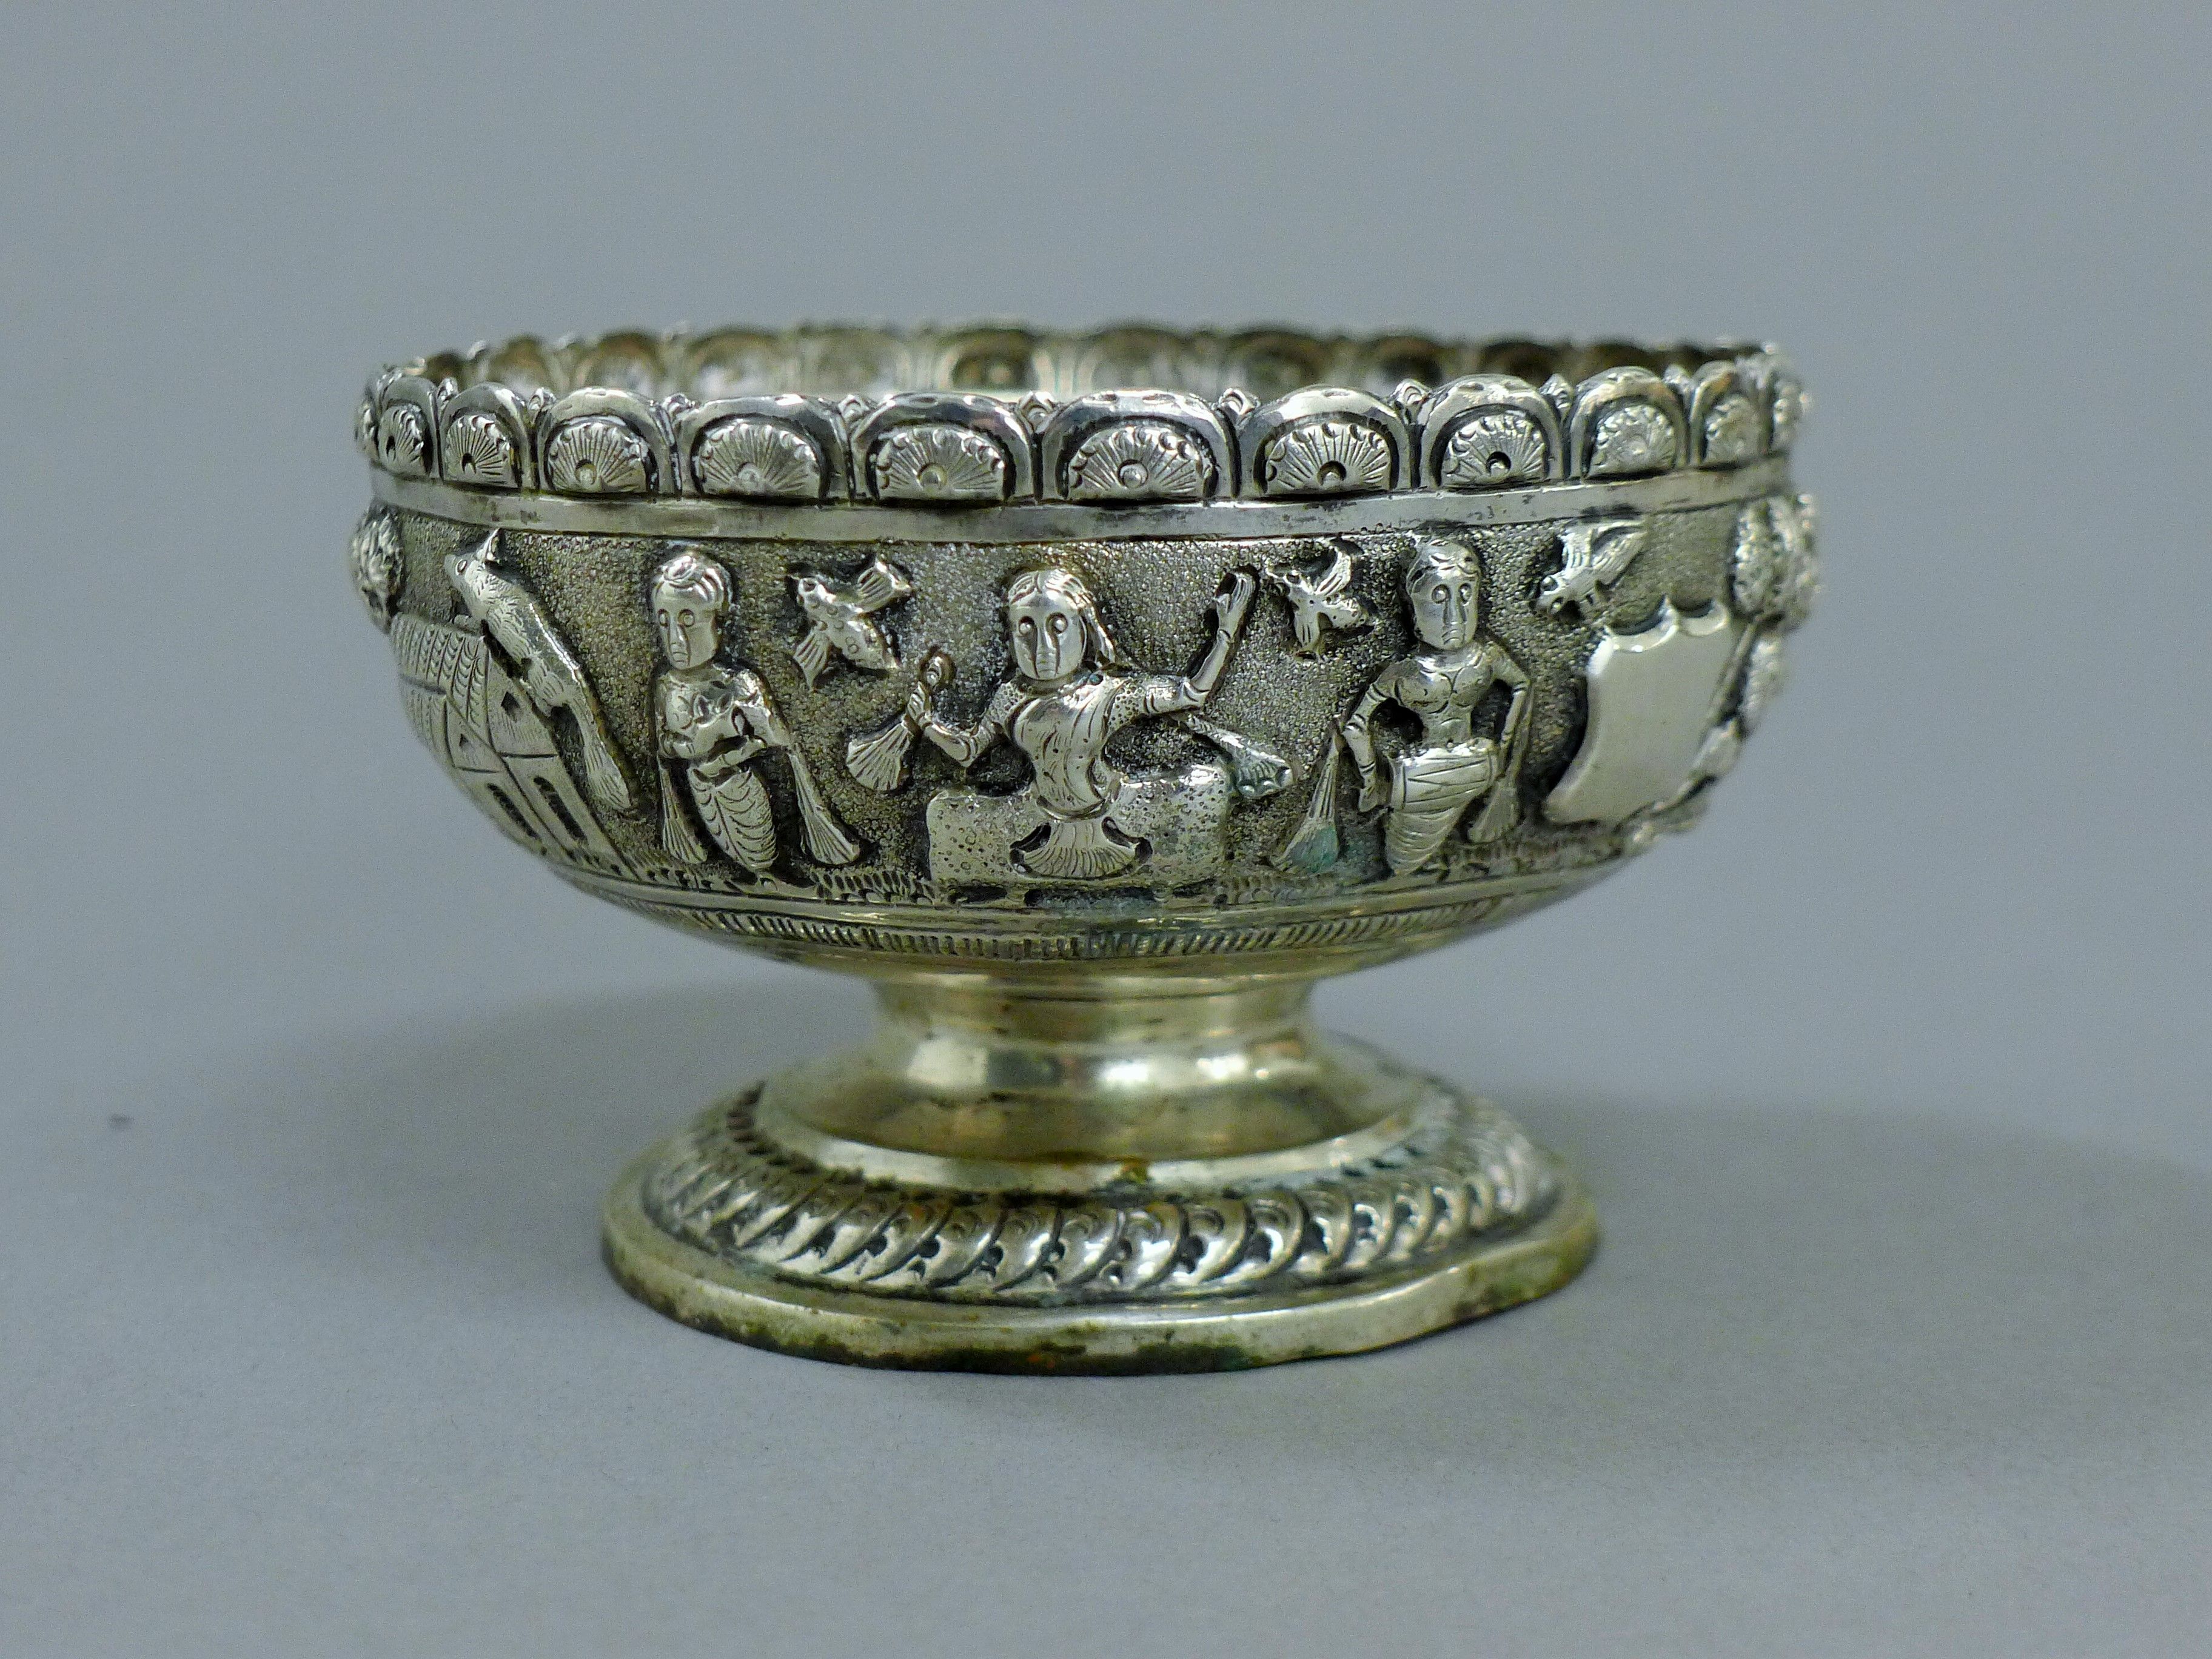 An Indian silver bowl with repousse decoration of rural scenery. 10 cm diameter. 85.9 grammes. - Image 2 of 5